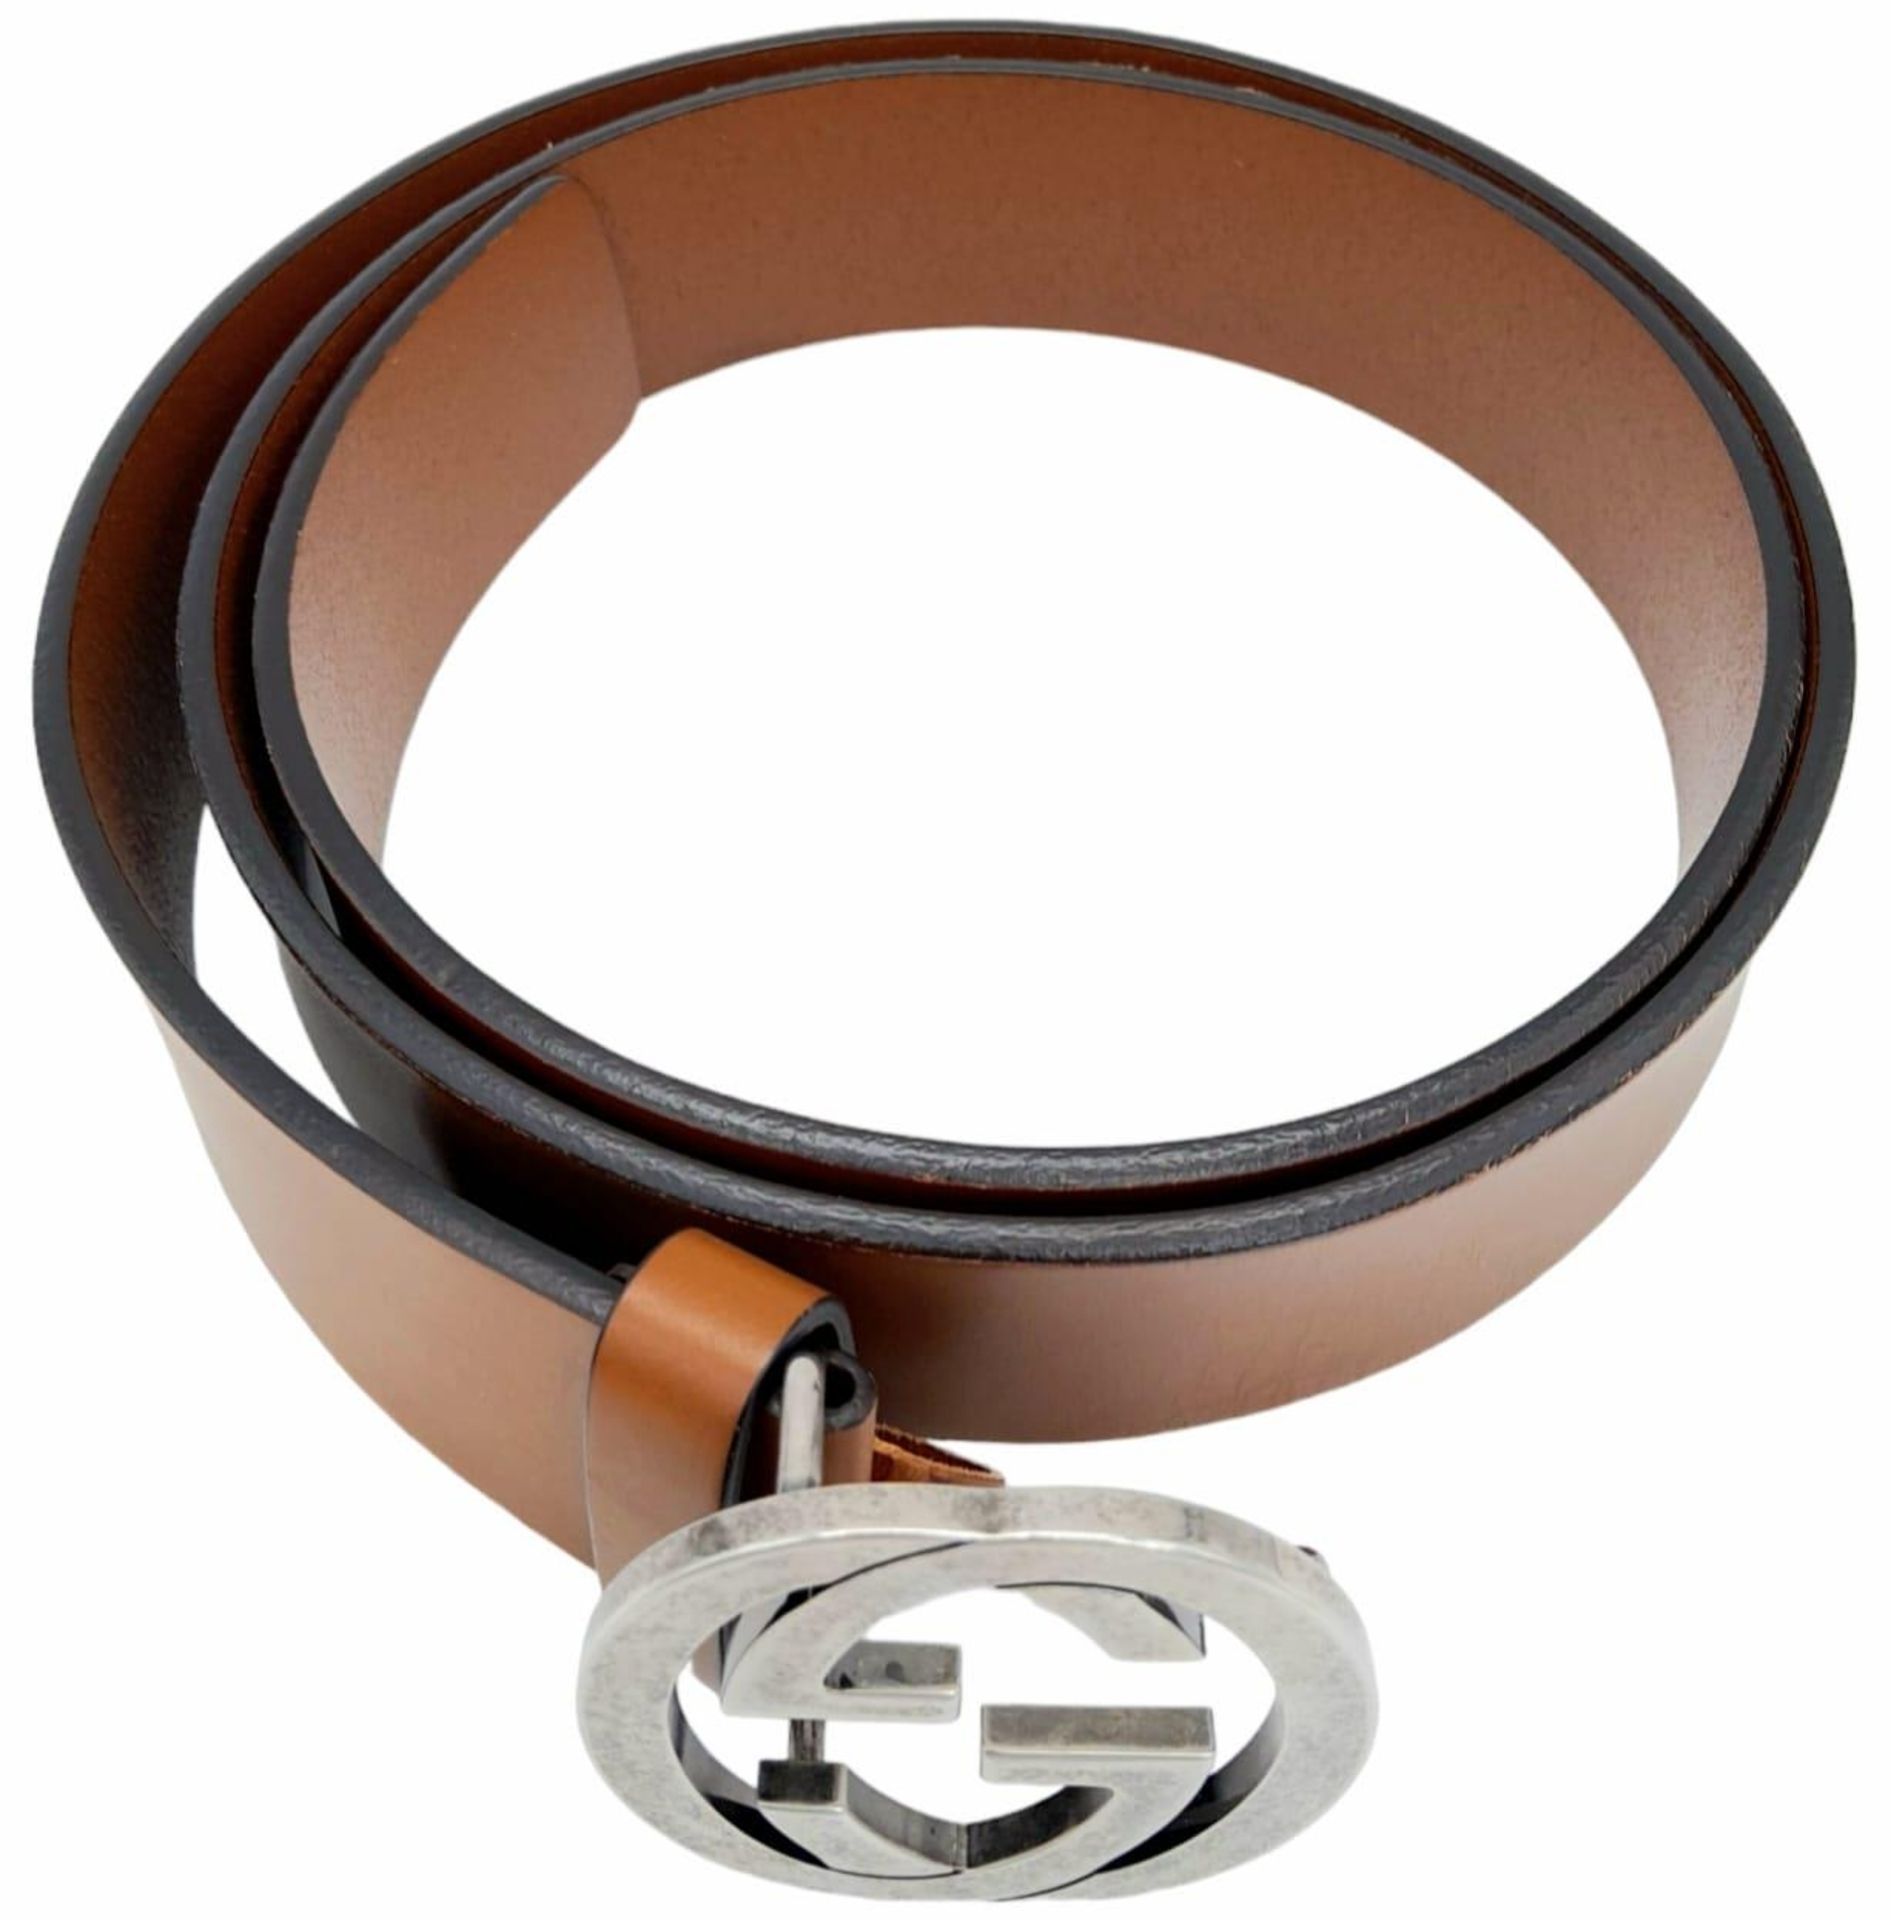 A Gucci Interlocking GG Signature Leather Belt. Brown Calfskin Leather, Silver Tone Hardware. - Image 3 of 6